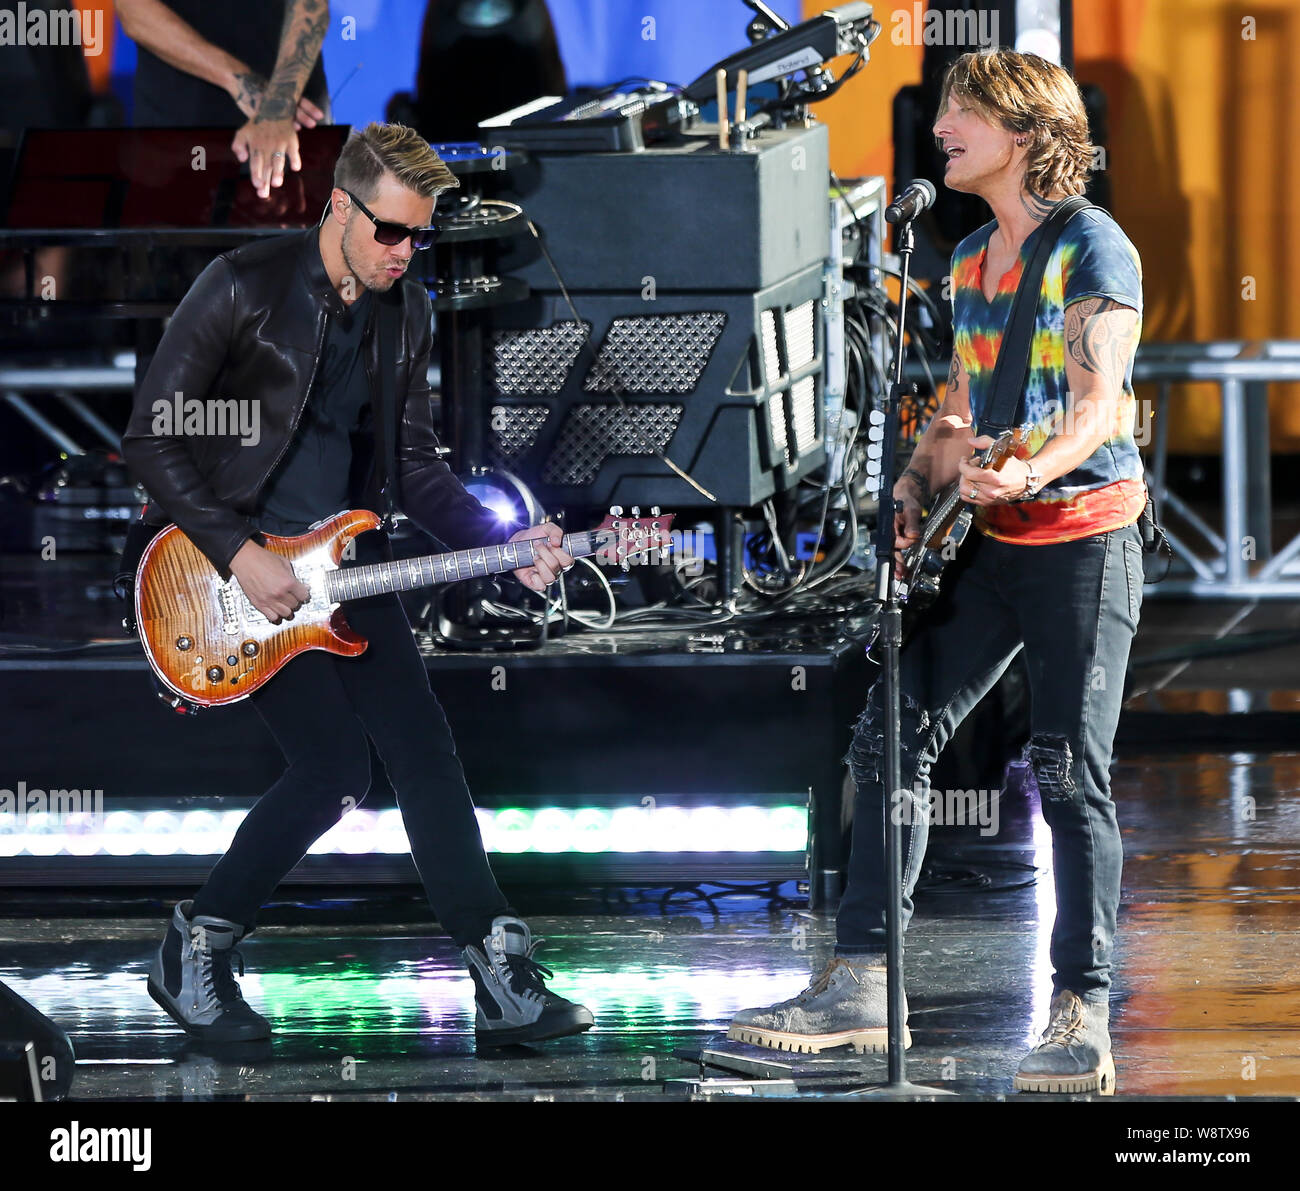 NEW YORK - AUG 9: Keith Urban (R) and Danny Rader perform on ABC's 'Good Morning America' on August 9, 2019 at Rumsey Playfield in New York City. Stock Photo